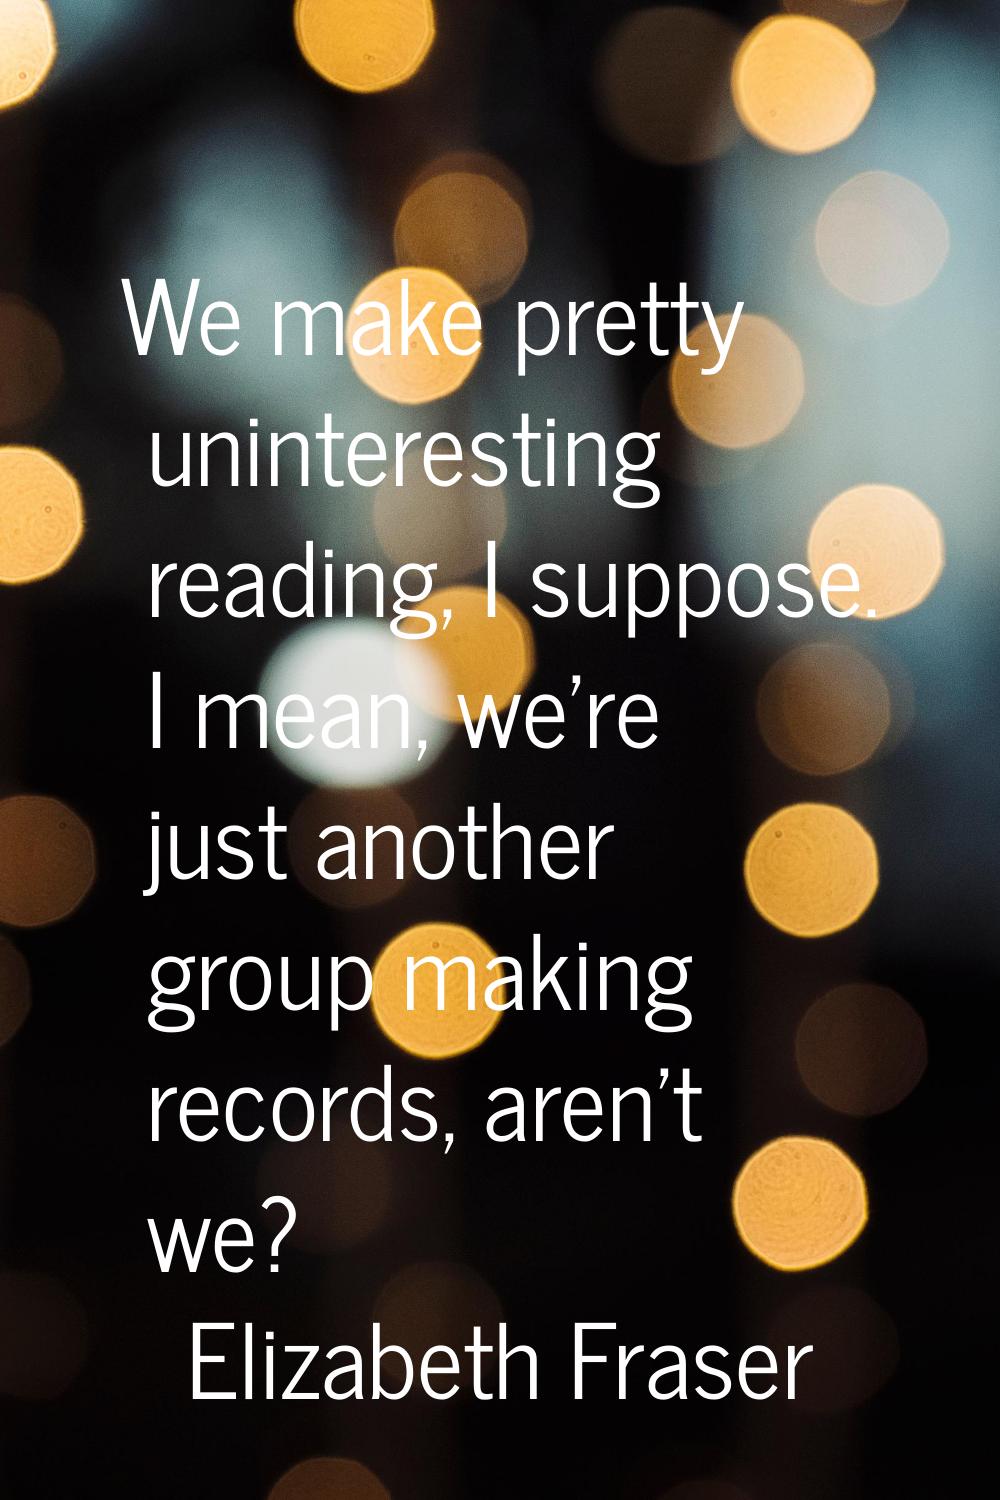 We make pretty uninteresting reading, I suppose. I mean, we're just another group making records, a